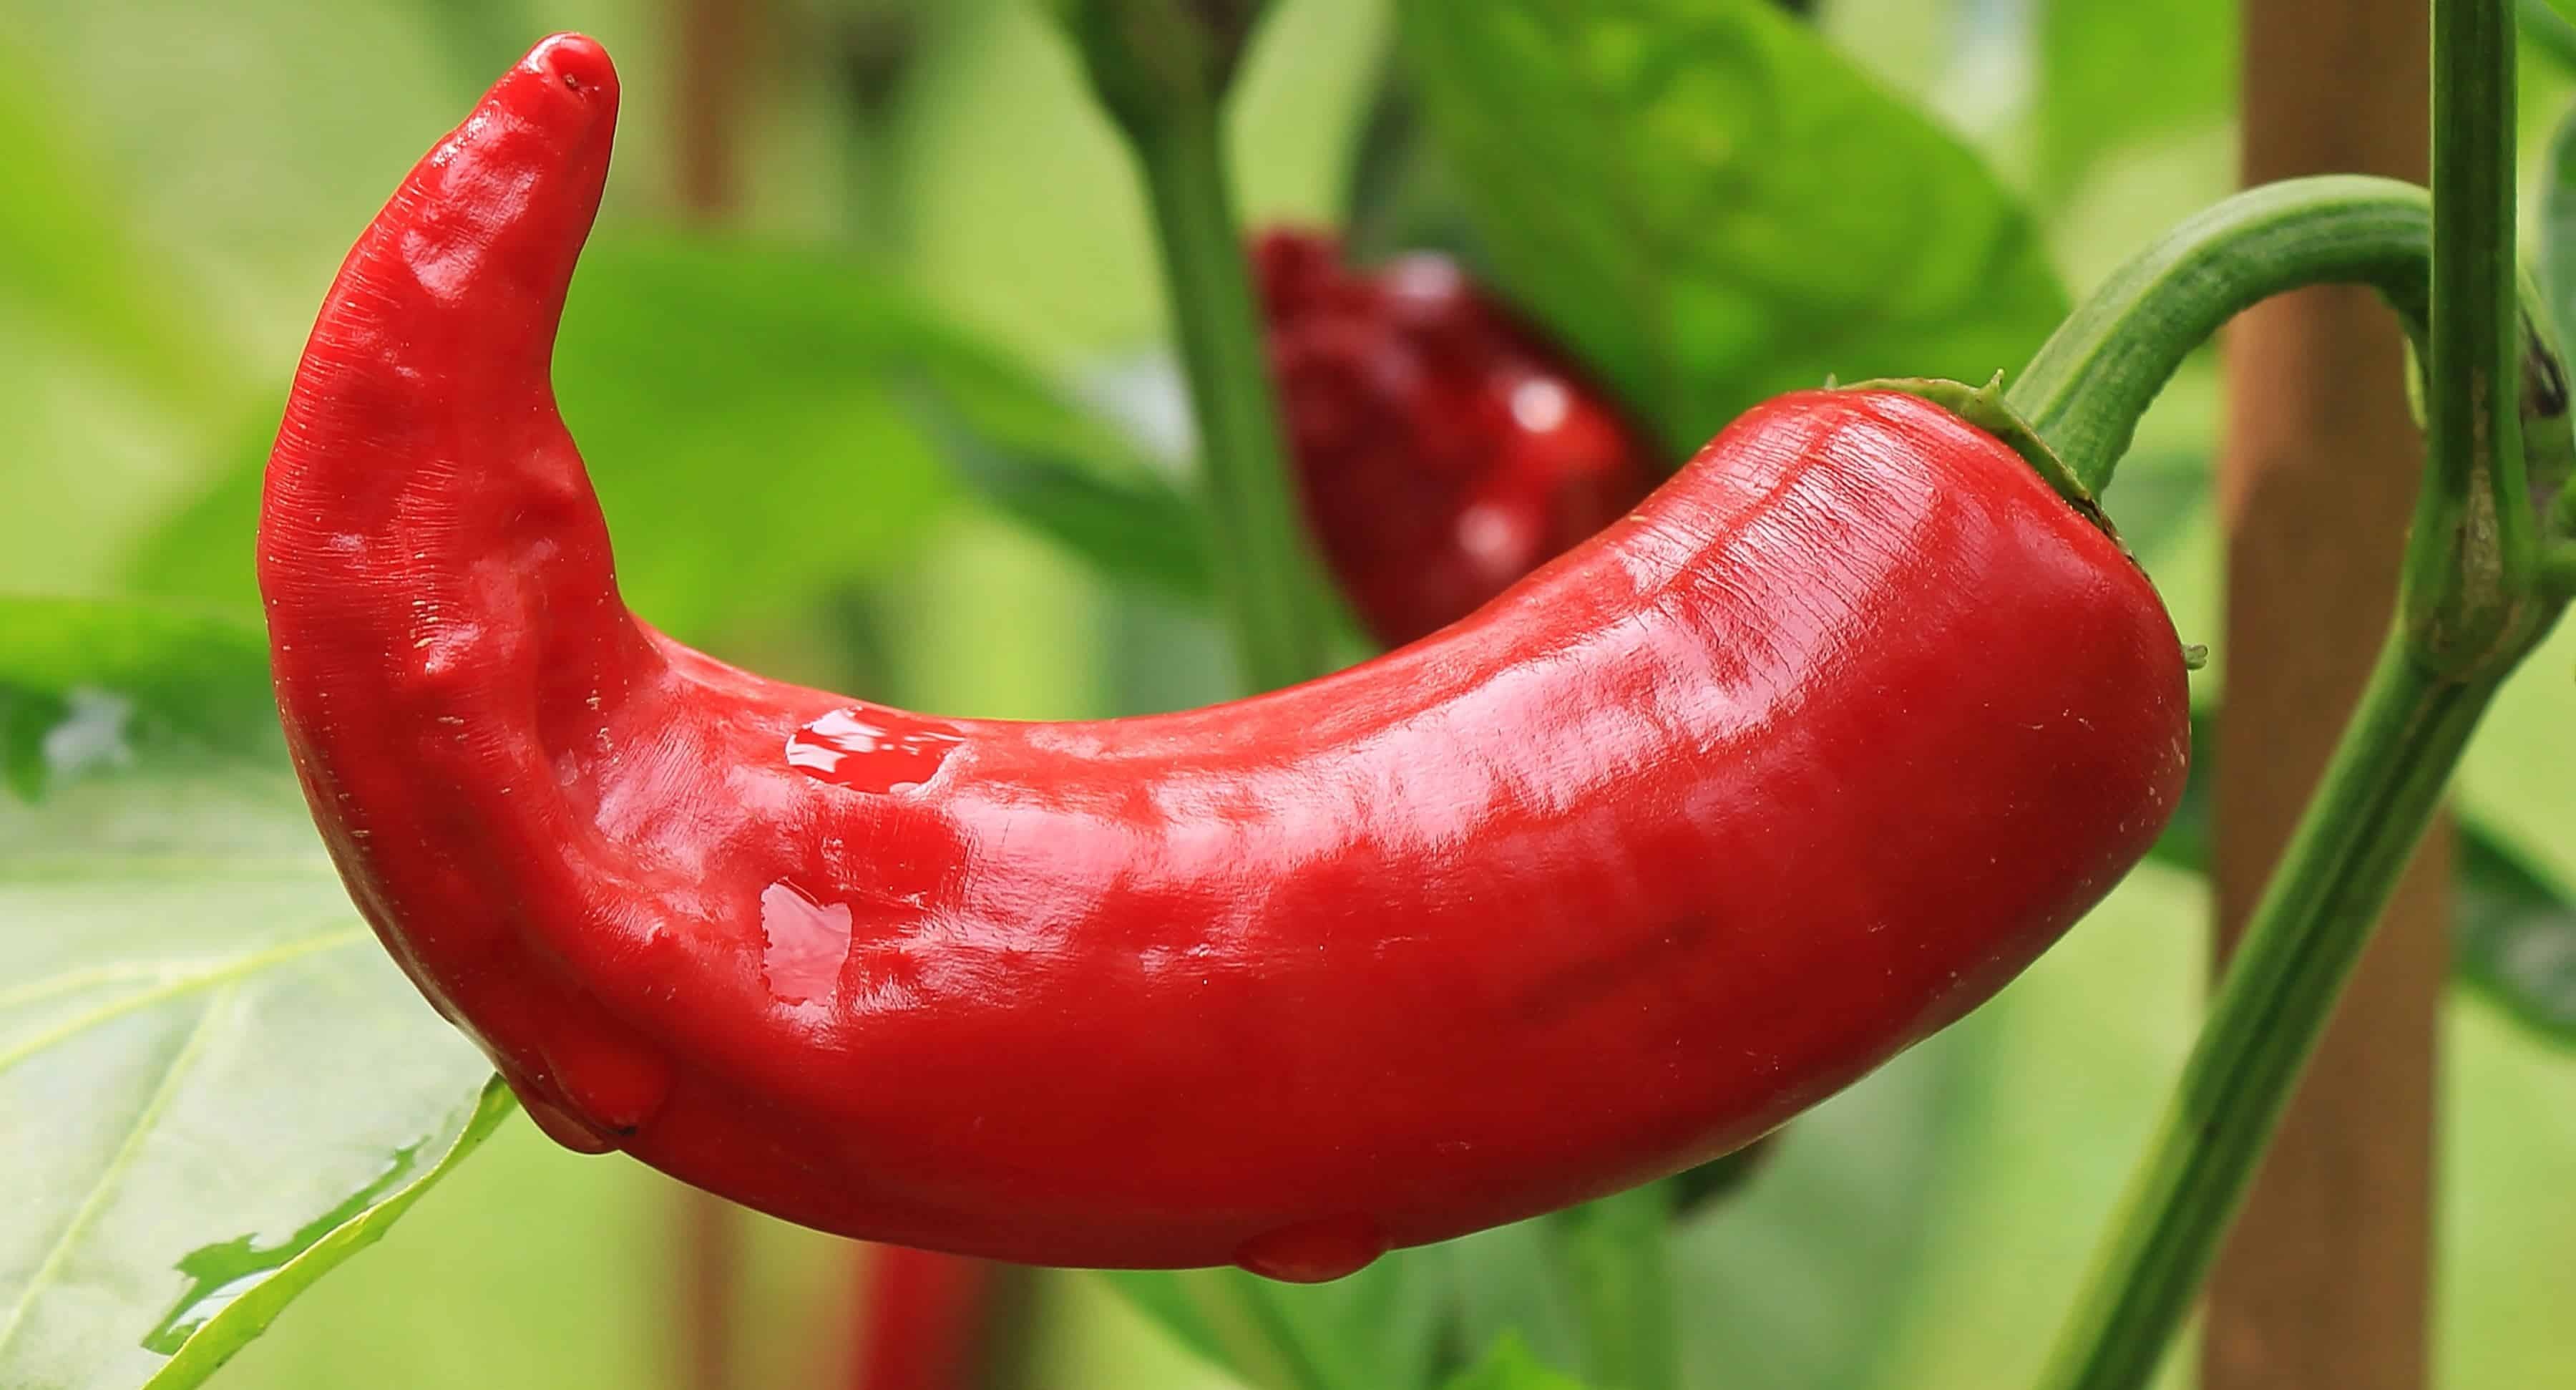 Red chili pepper, Organic nutrition, Natural vegetable, Healthy spice, 3600x1950 HD Desktop